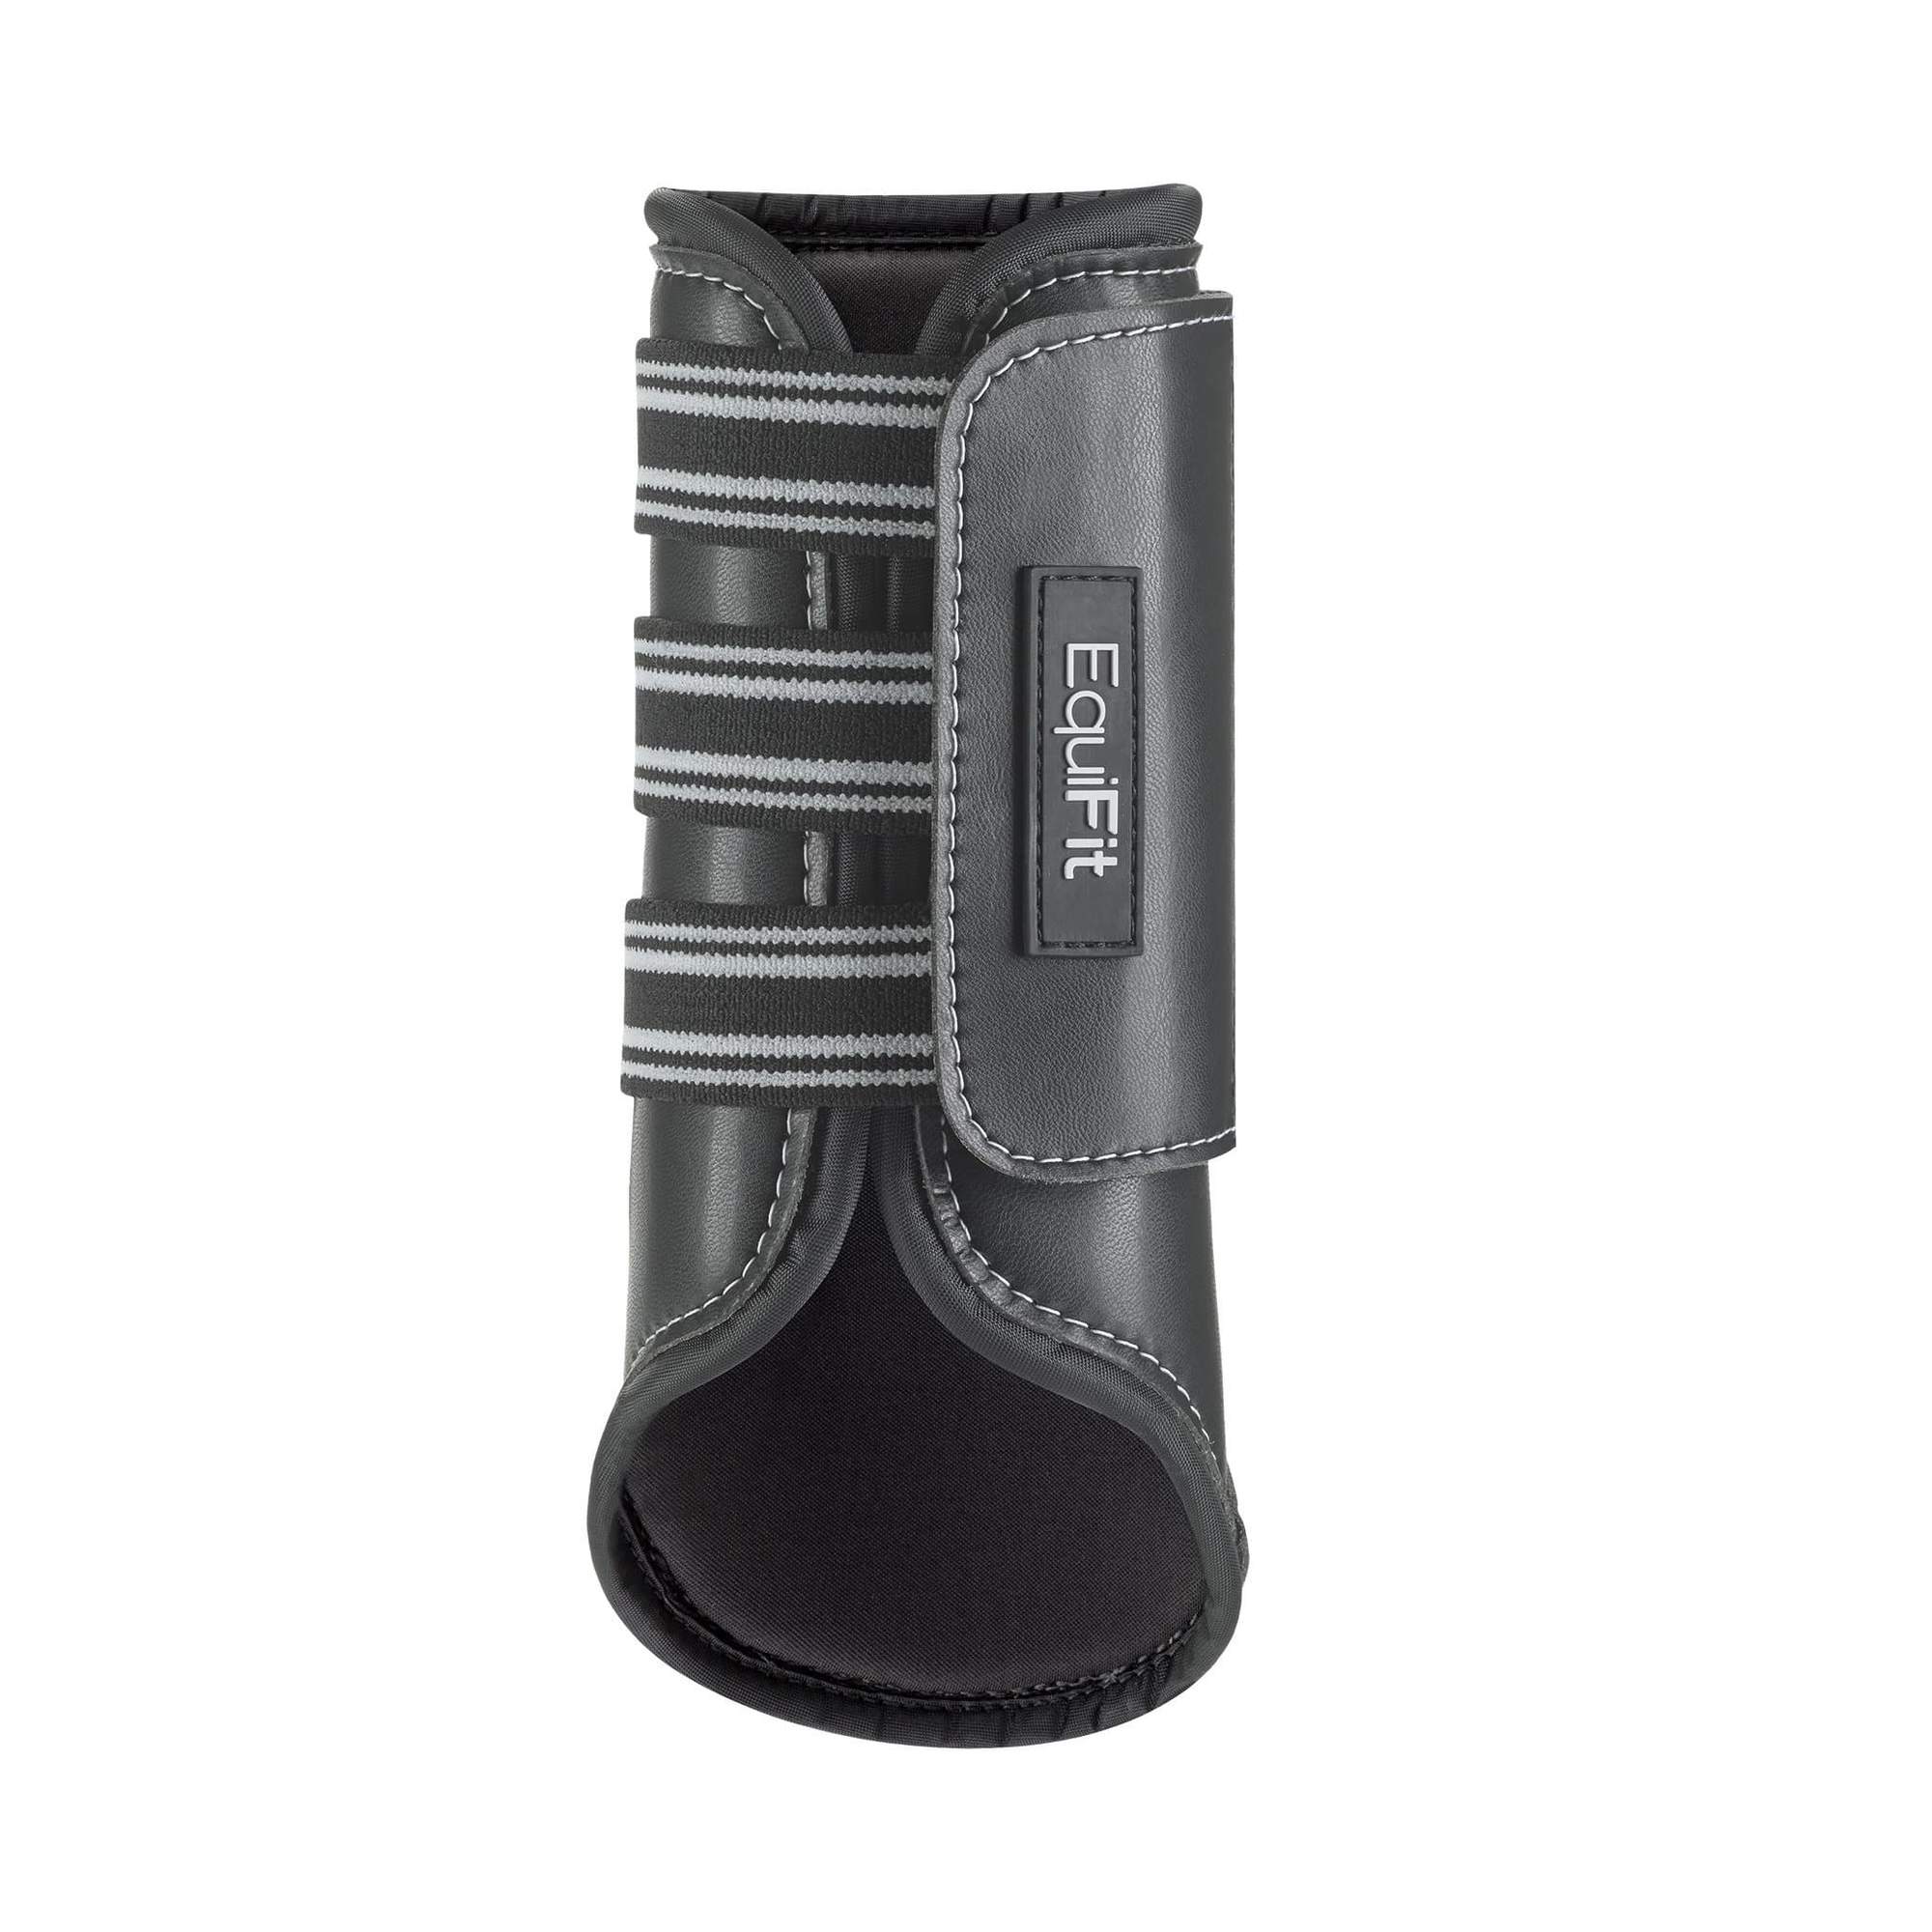 MULTITEQ™ FRONT BOOT